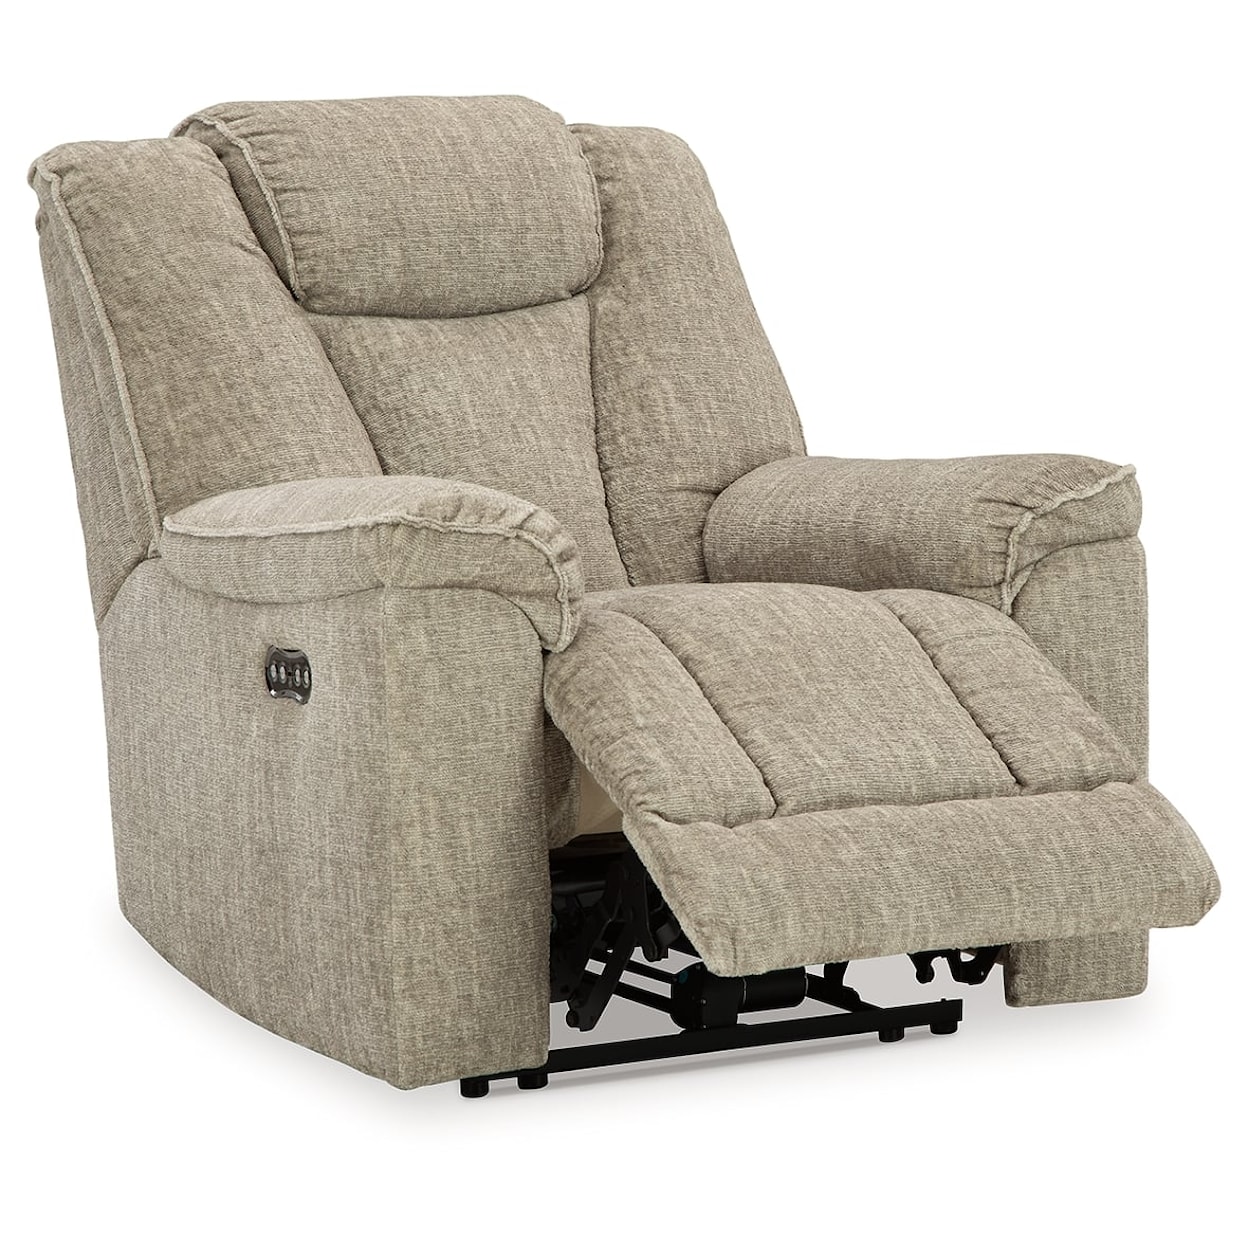 Signature Design by Ashley Furniture Hindmarsh Power Recliner with Adjustable Headrest